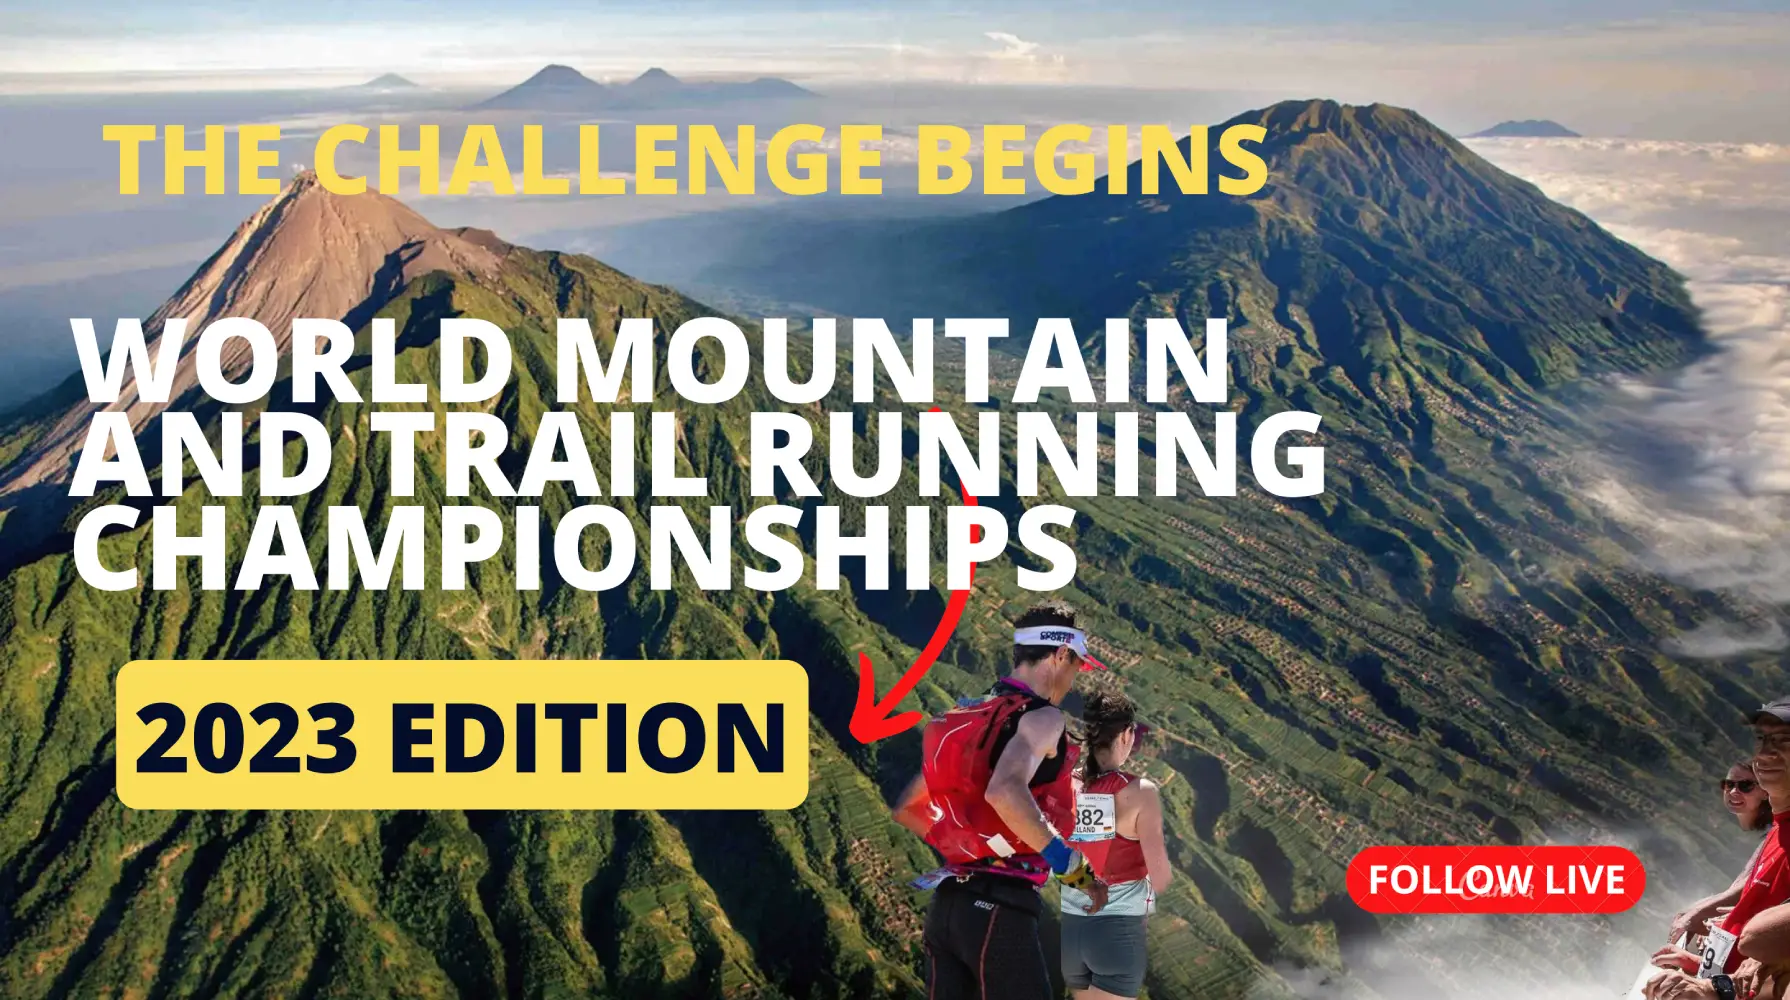 World Mountain and Trail Running Championships 2023